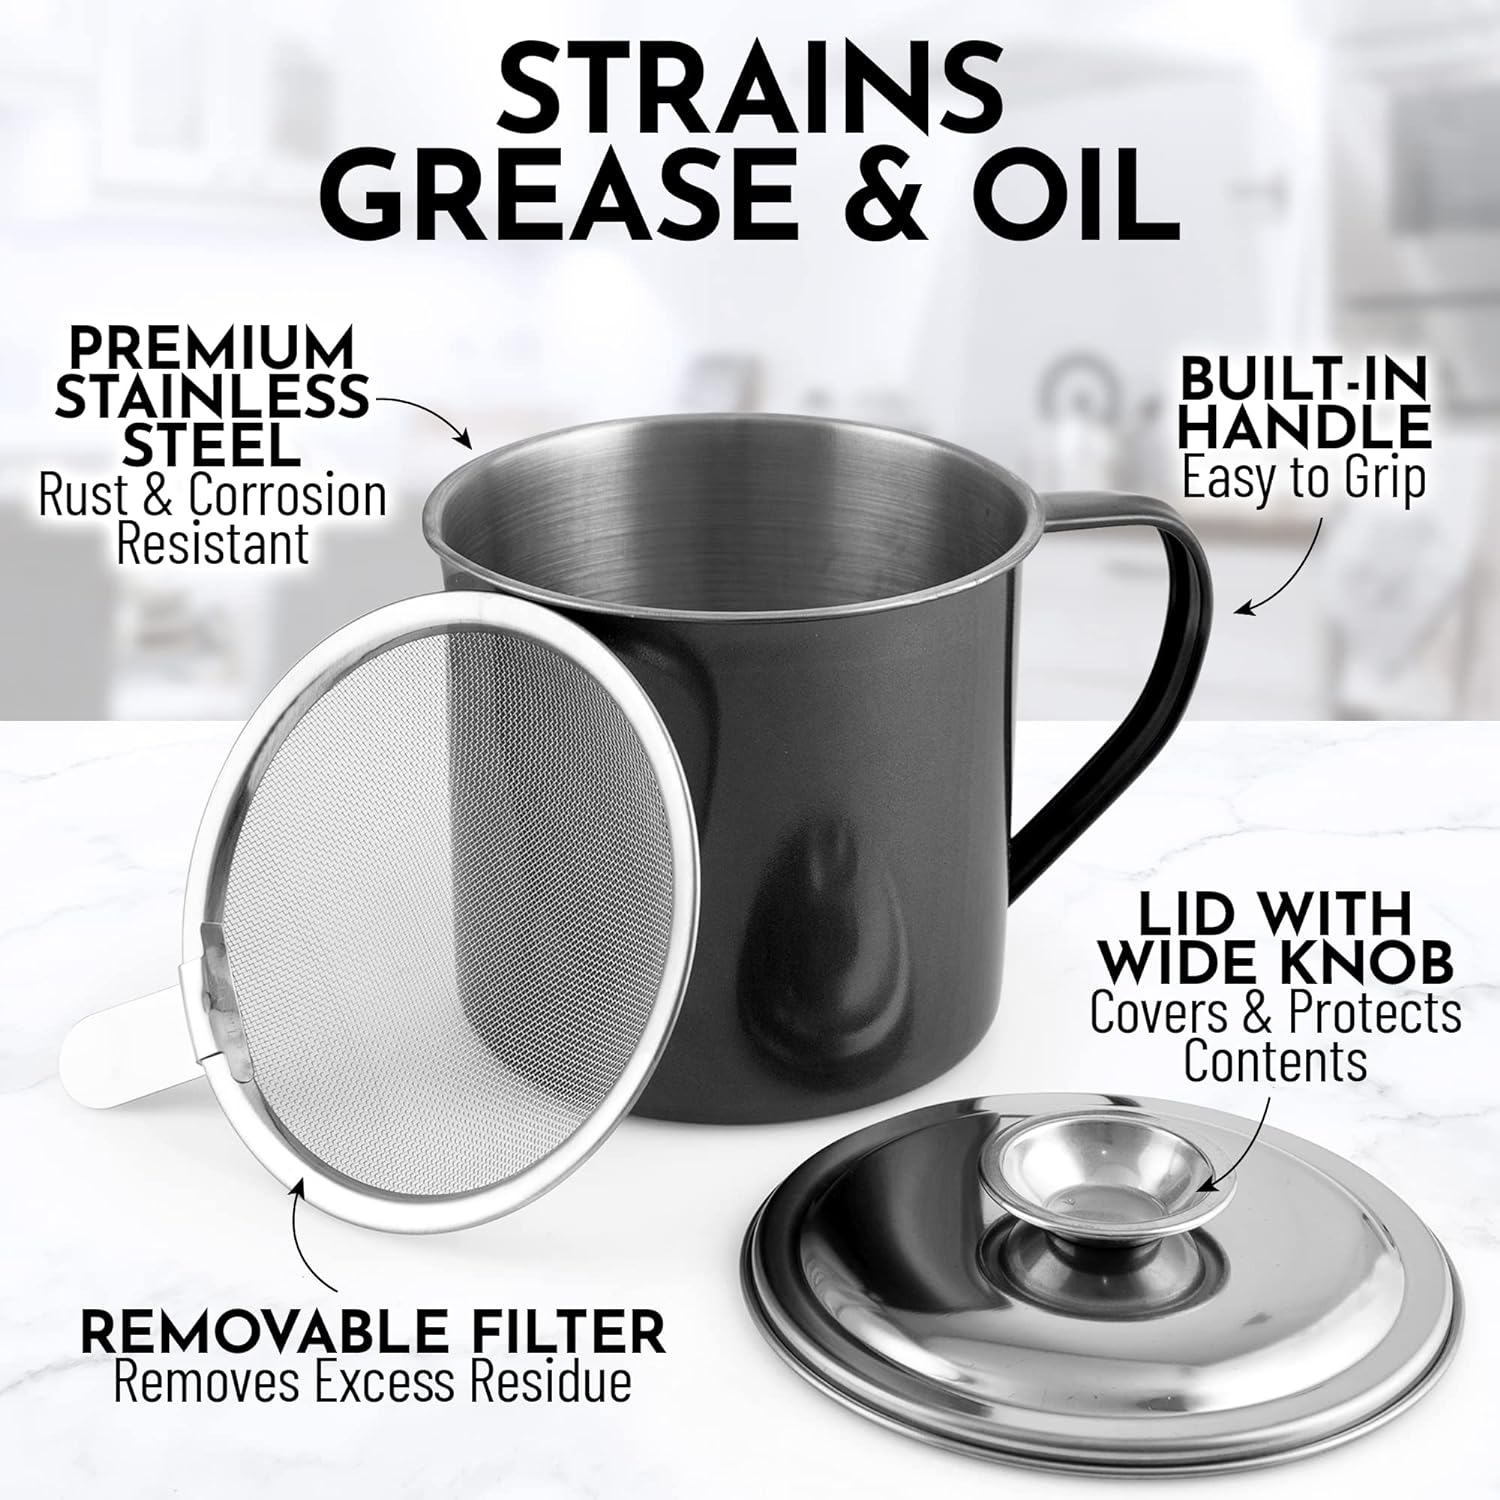 Stainless Steel Grease Strainer 